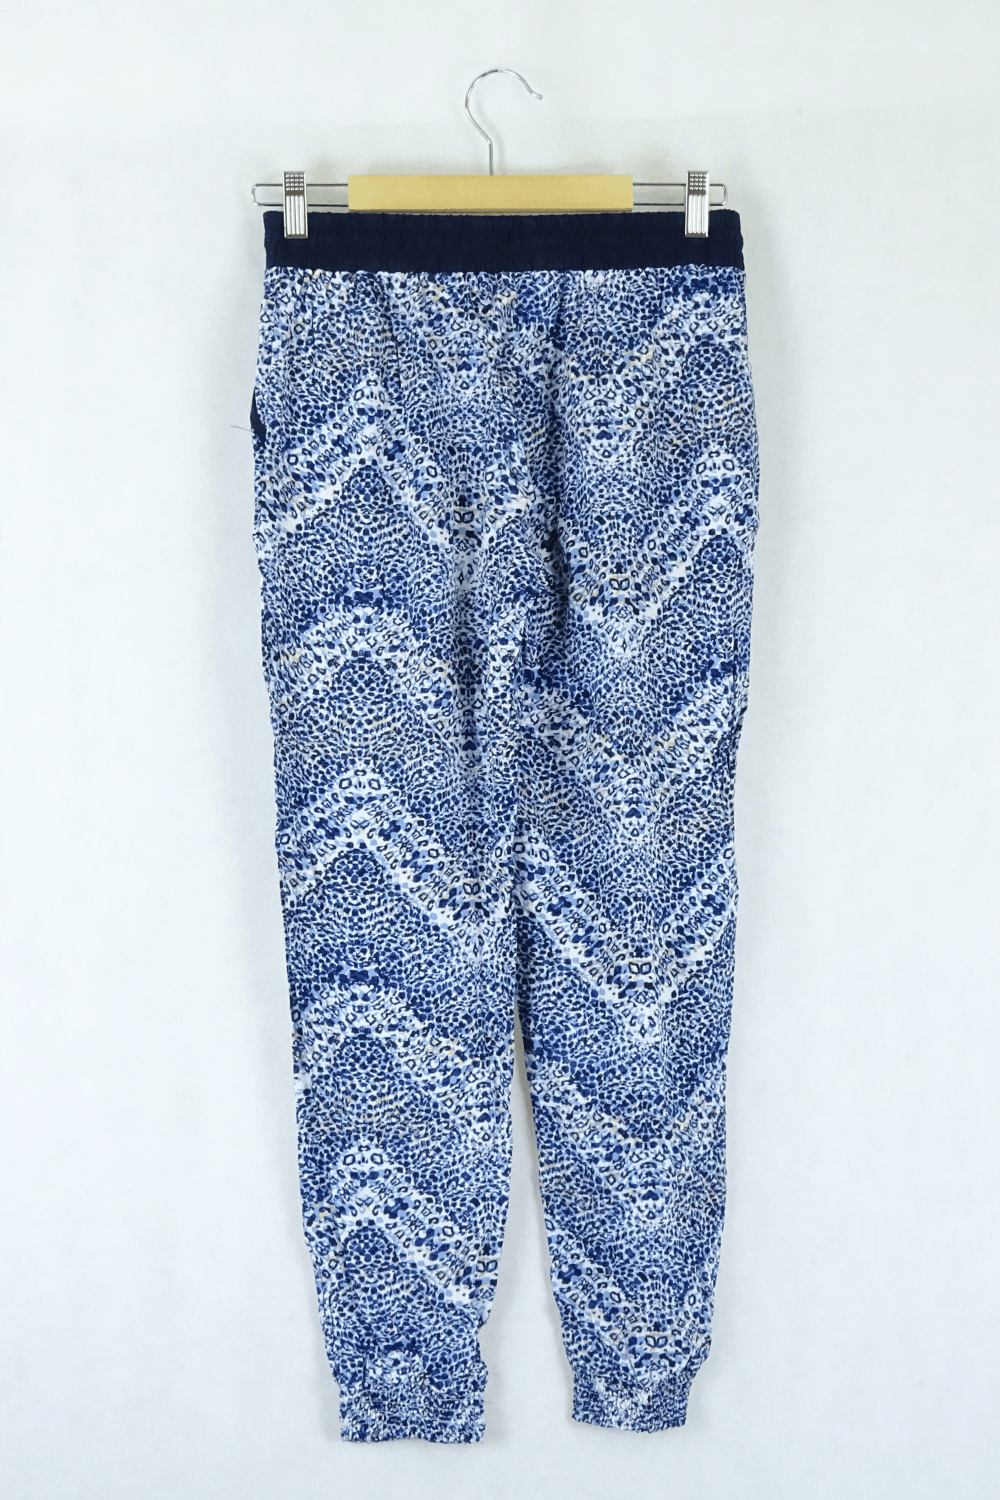 Just Jeans Navy and White Printed Pants 8